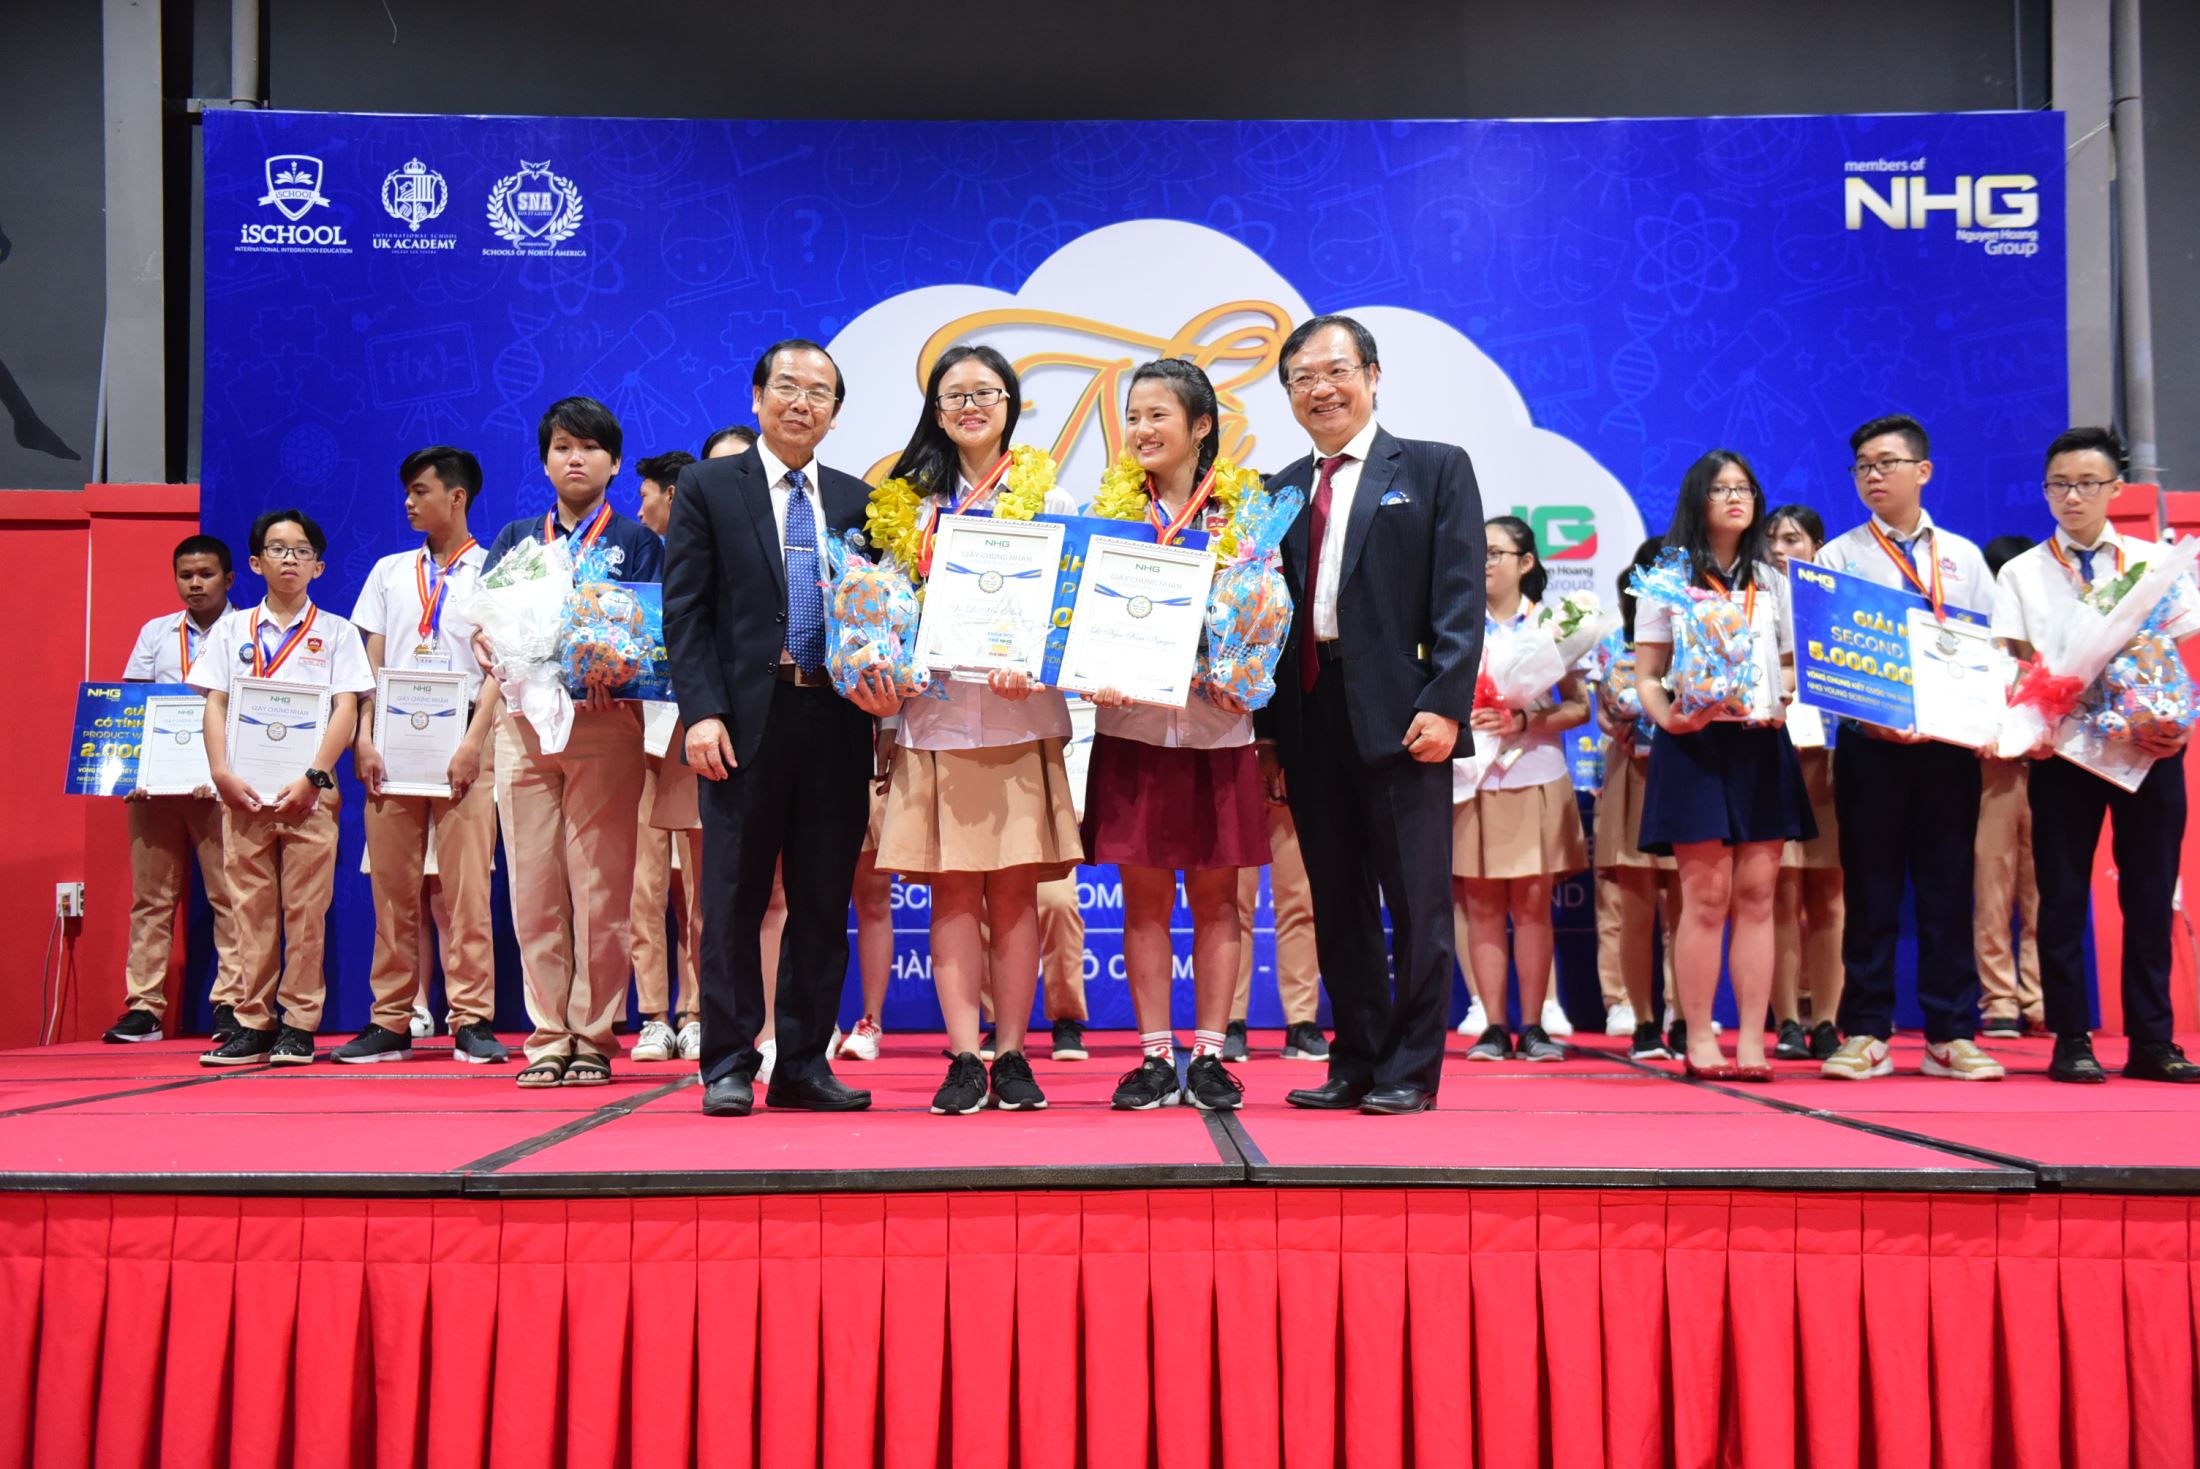 Dr. Dinh Quang Nuong – Deputy CEO of NHG and Dr. Do Manh Cuong – NHG Academic Director and Permanent member of Education Council awarding the first prize to Vo Le Mai Anh and Le Nguyen from class 9/3 iSchool Nha Trang for “The wifi switch – Handicapped remote control”